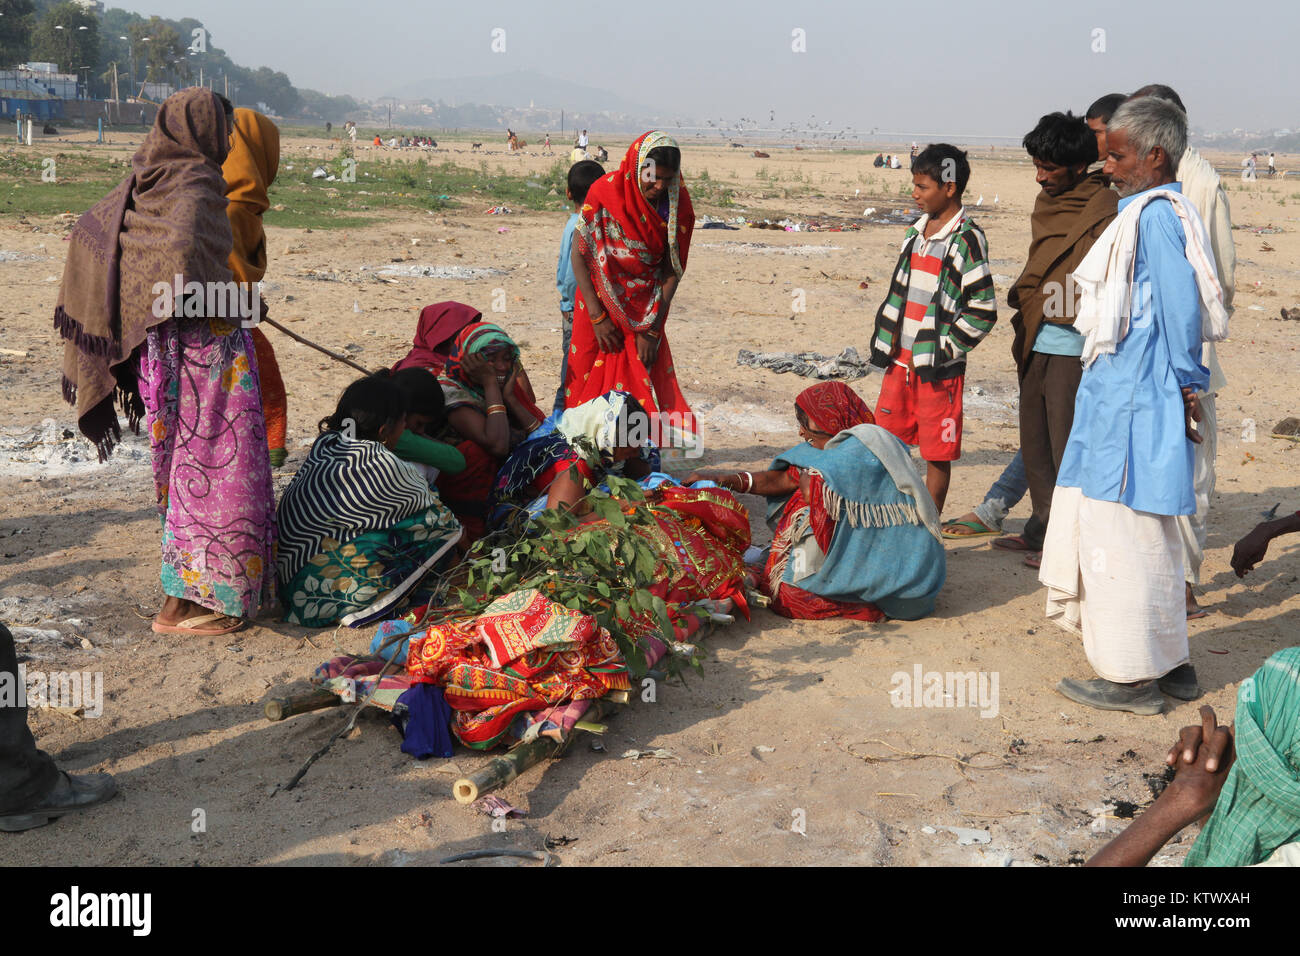 The relatives of a deceased man grieve over his body before it is cremated in Gaya, Bihar, India Stock Photo